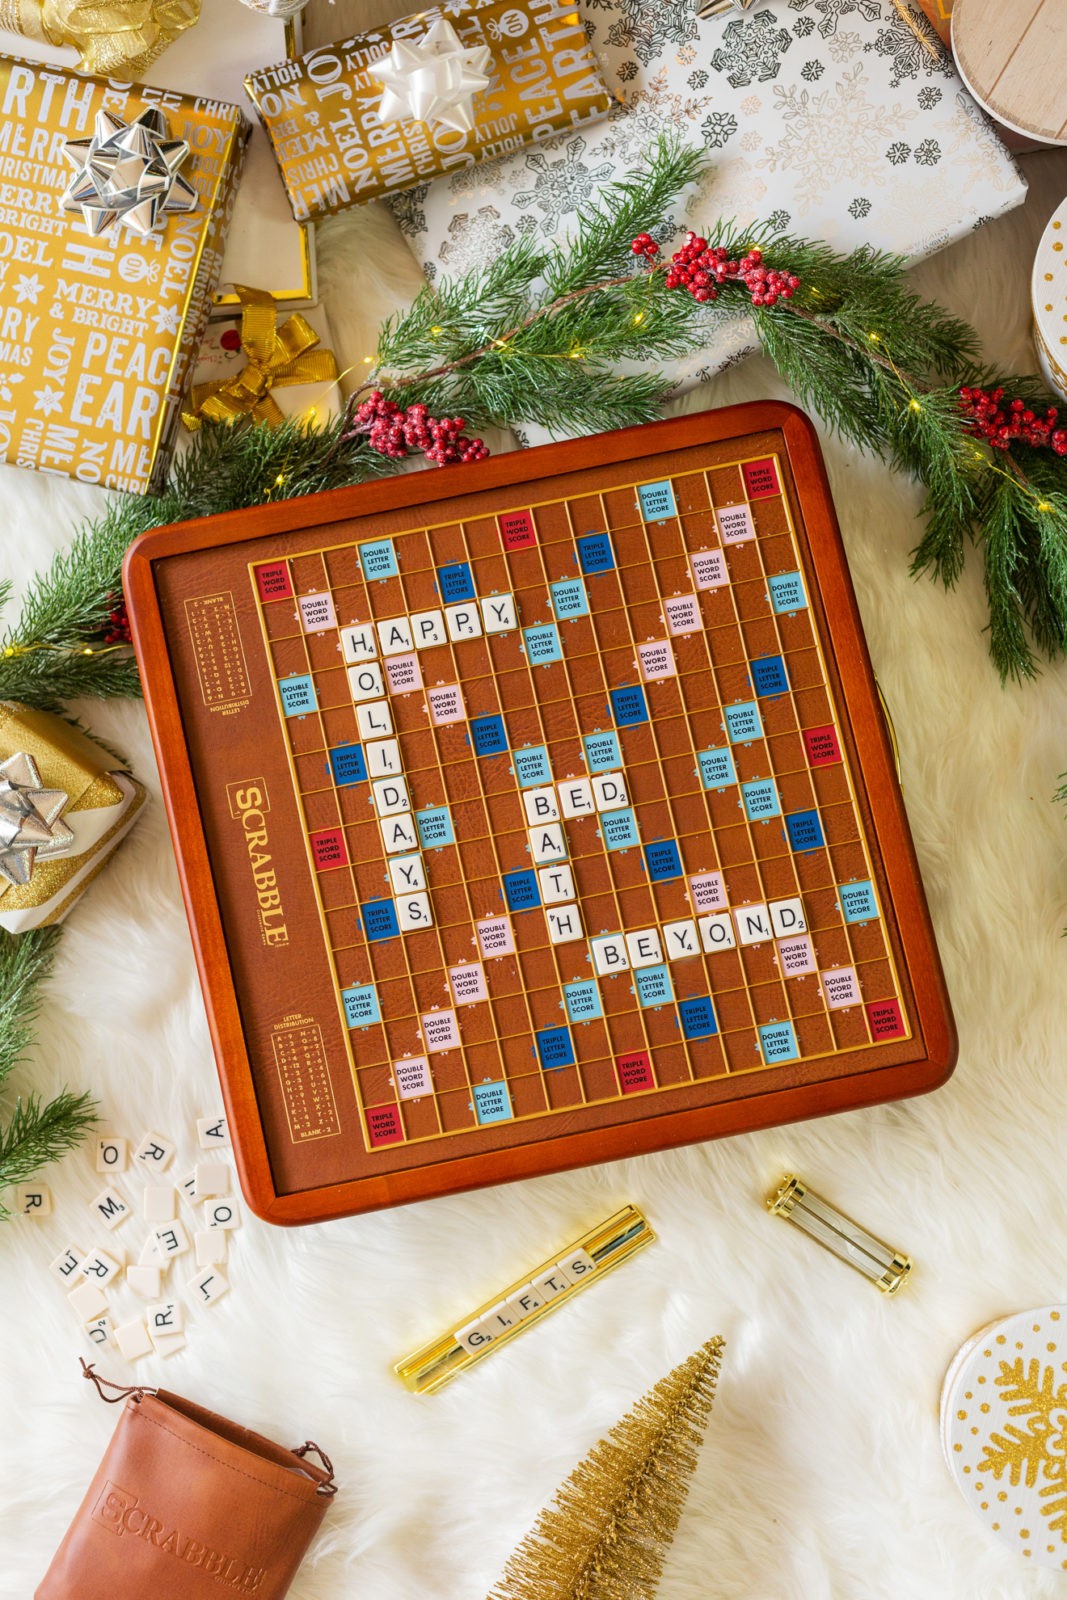 Extra Special Holiday Gifts from Bed Bath and Beyond by Lifestyle Blogger Laura Lily, Luxury Edition Scrabble,